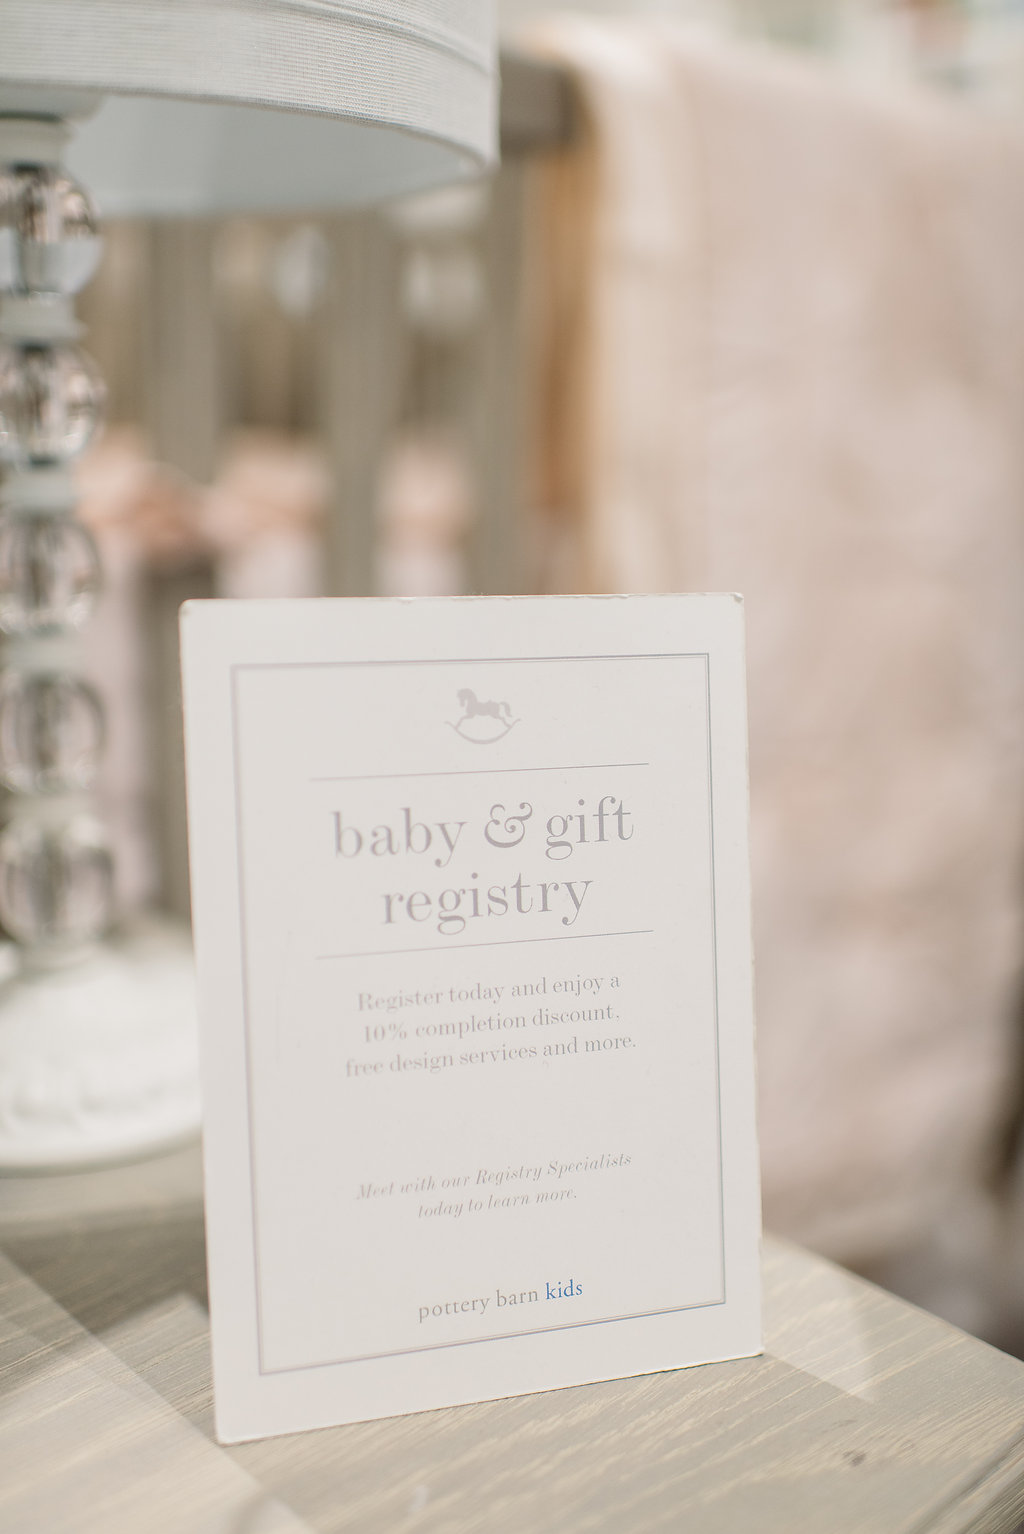 Registry Completion Discount from Pottery Barn Kids